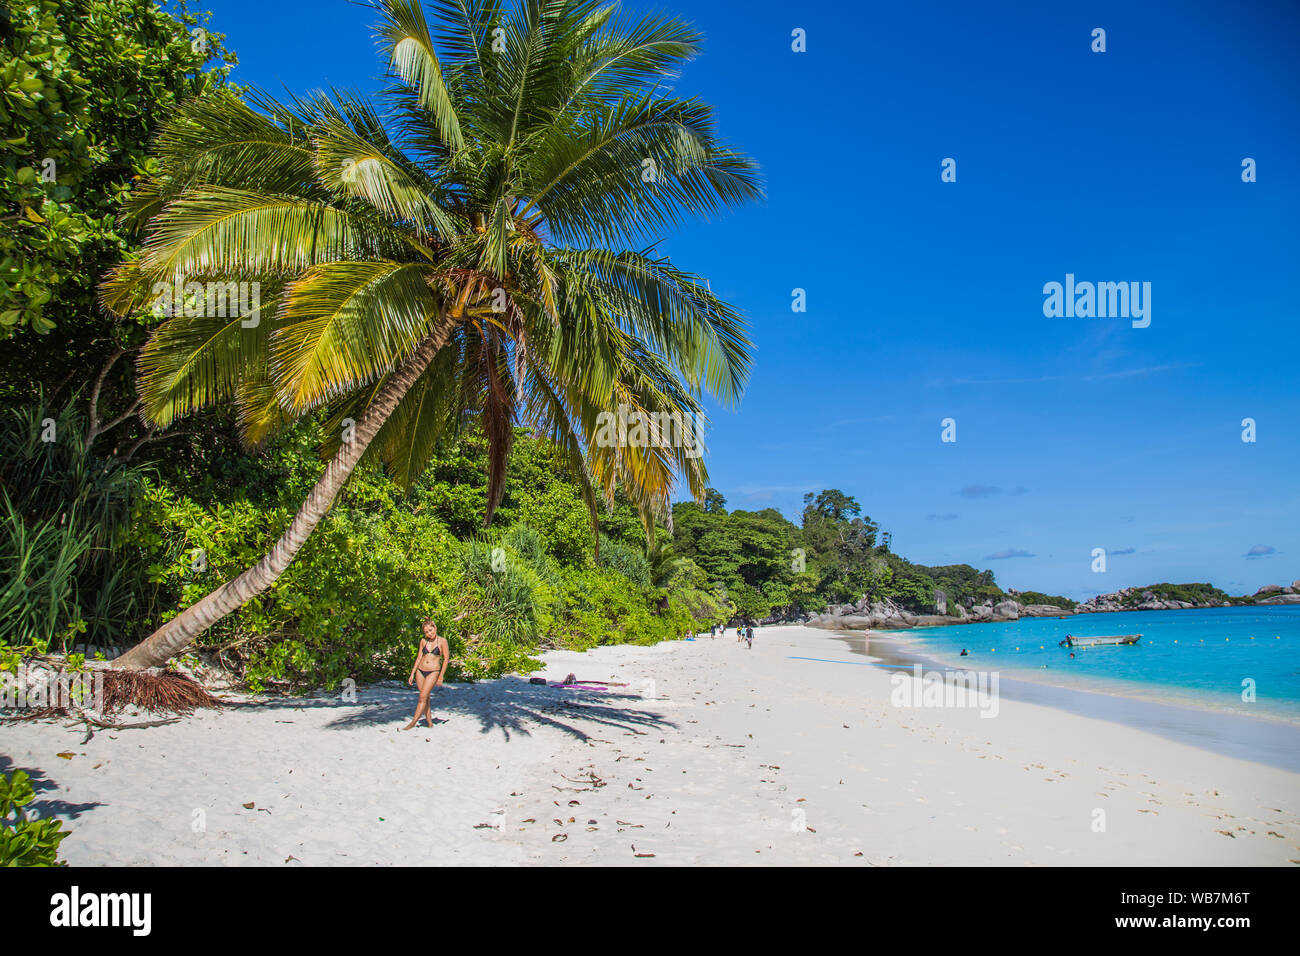 Similan island views from the beach and above, in Thailand Stock Photo